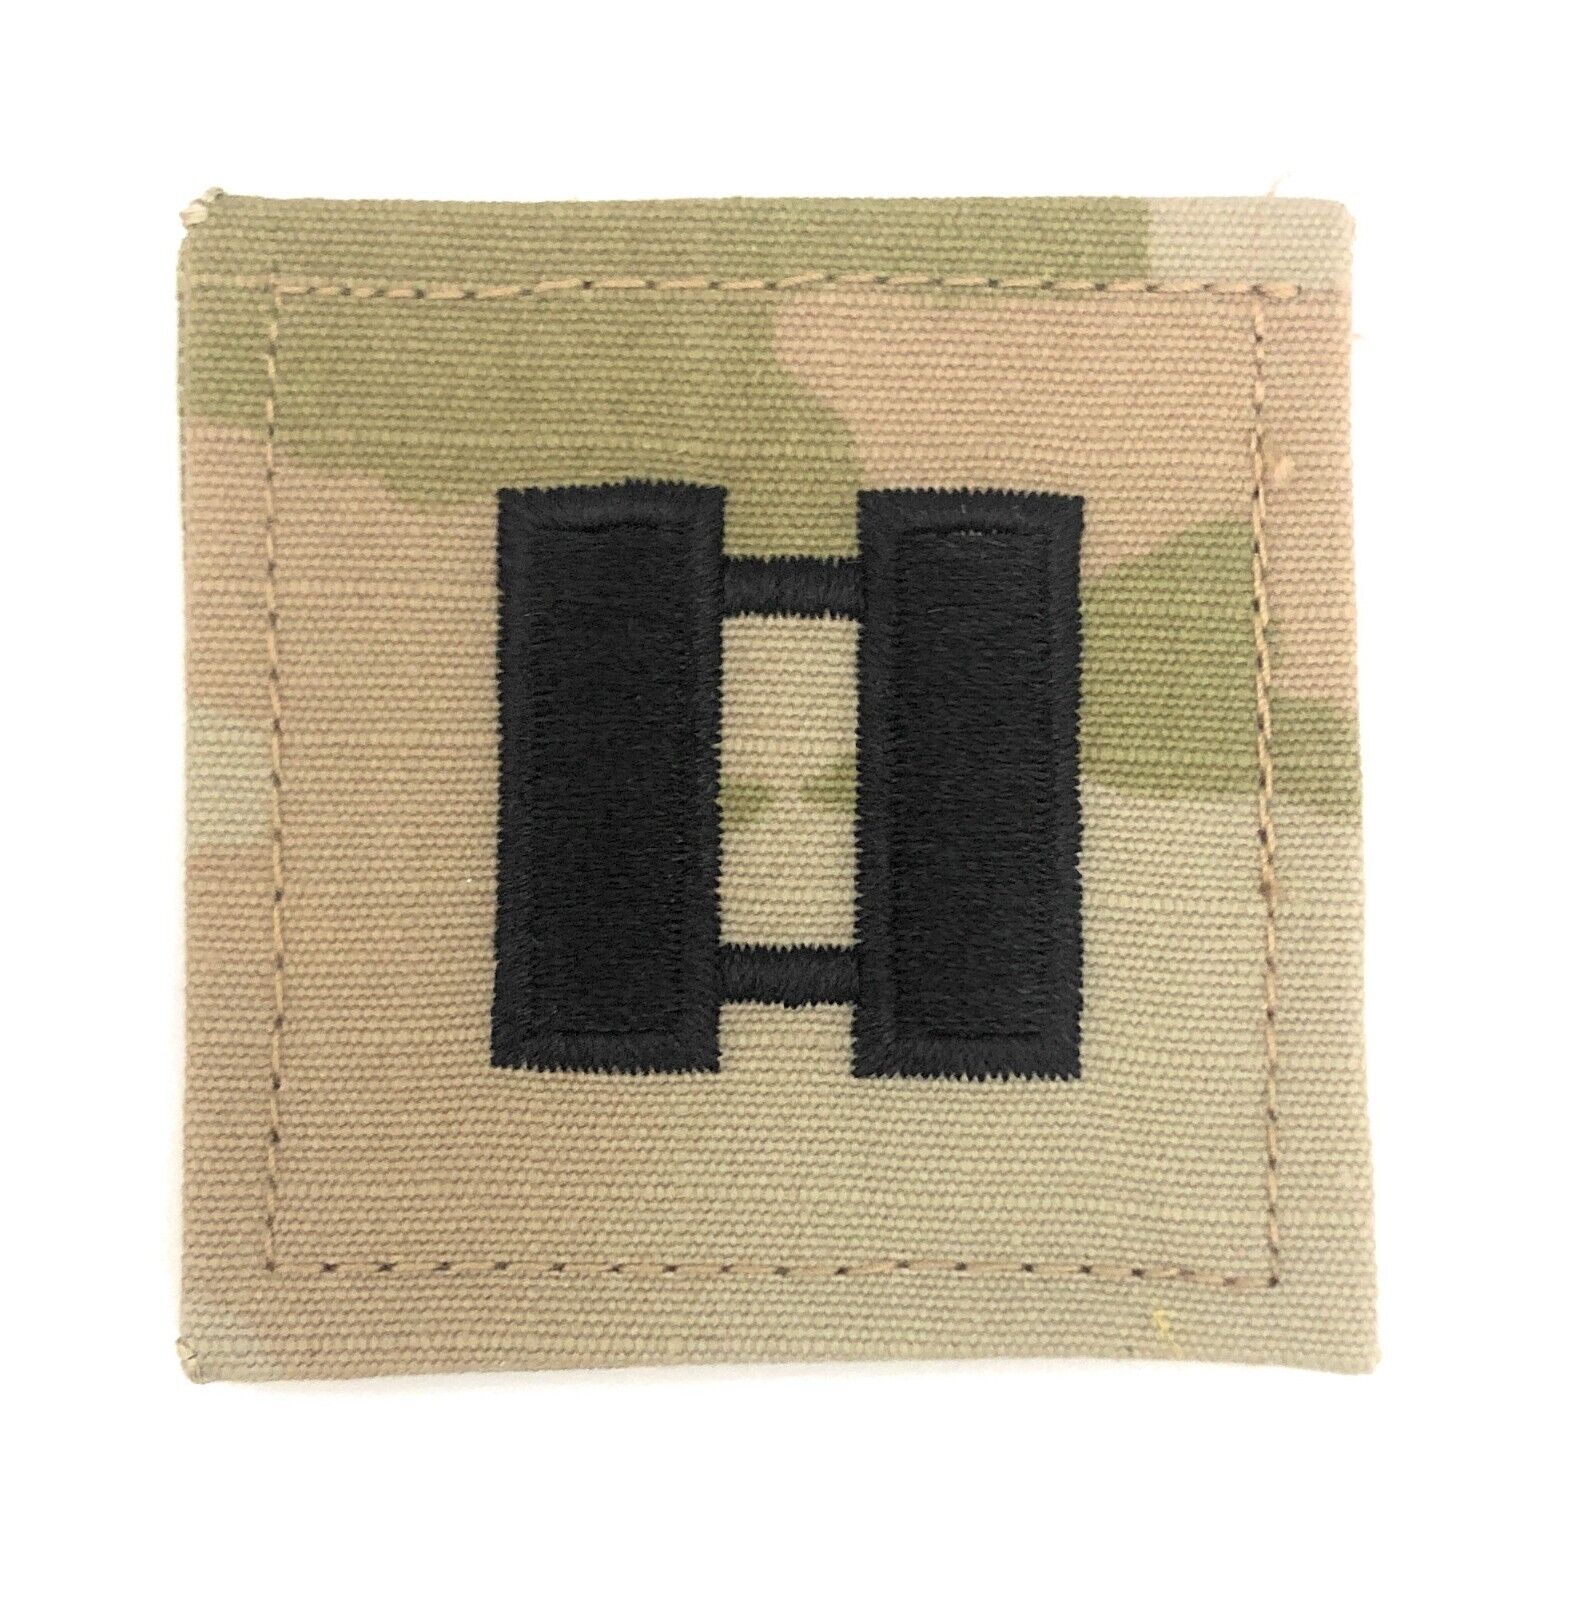 US Army OCP Rank 2x2 With Hook Fastener - O3 Captain